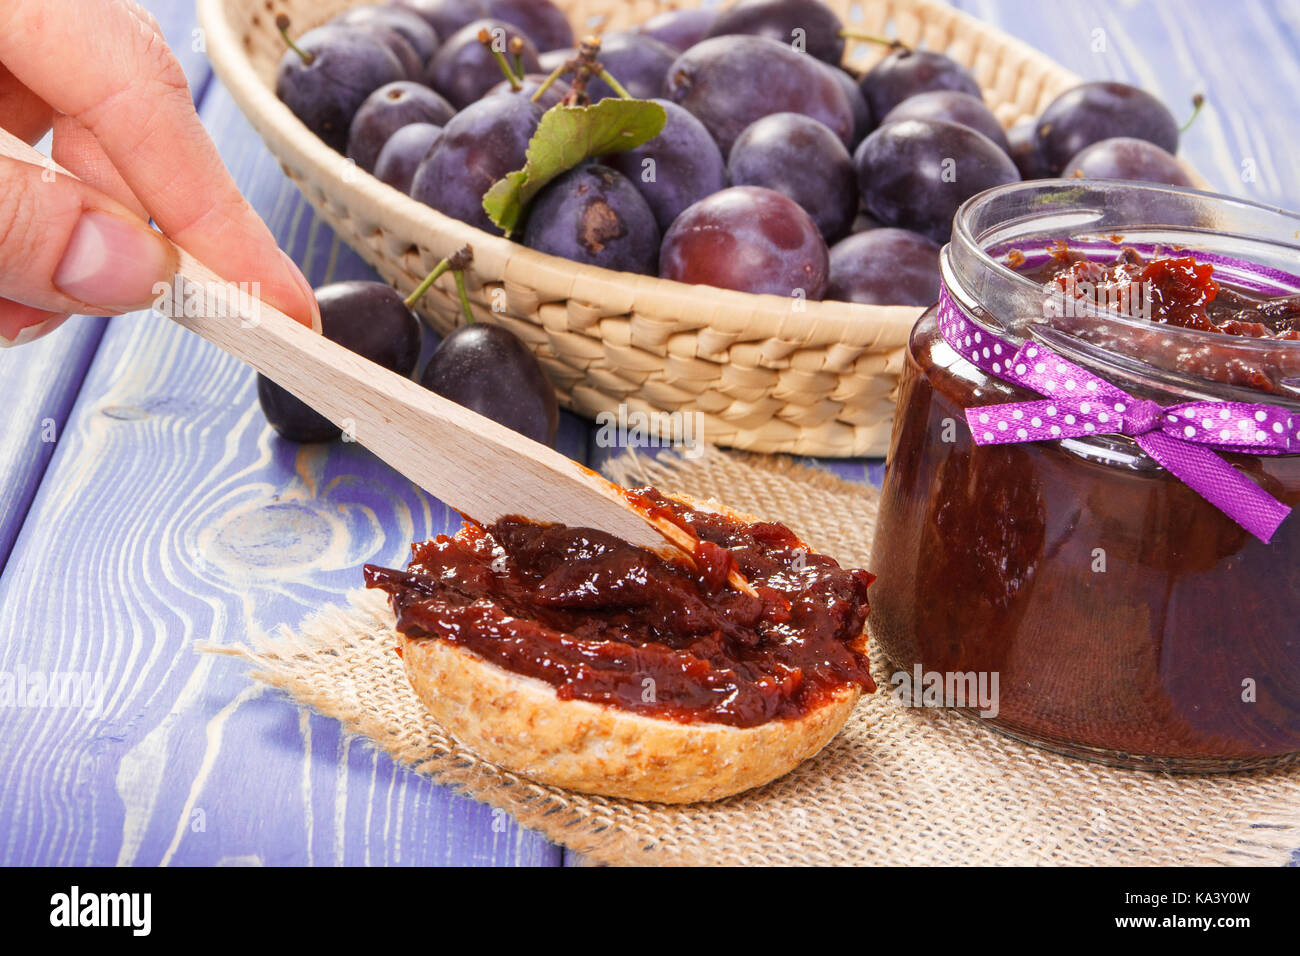 Preparing sandwiches with homemade plum marmalade or jam, concept of healthy sweet snack, breakfast or dessert Stock Photo